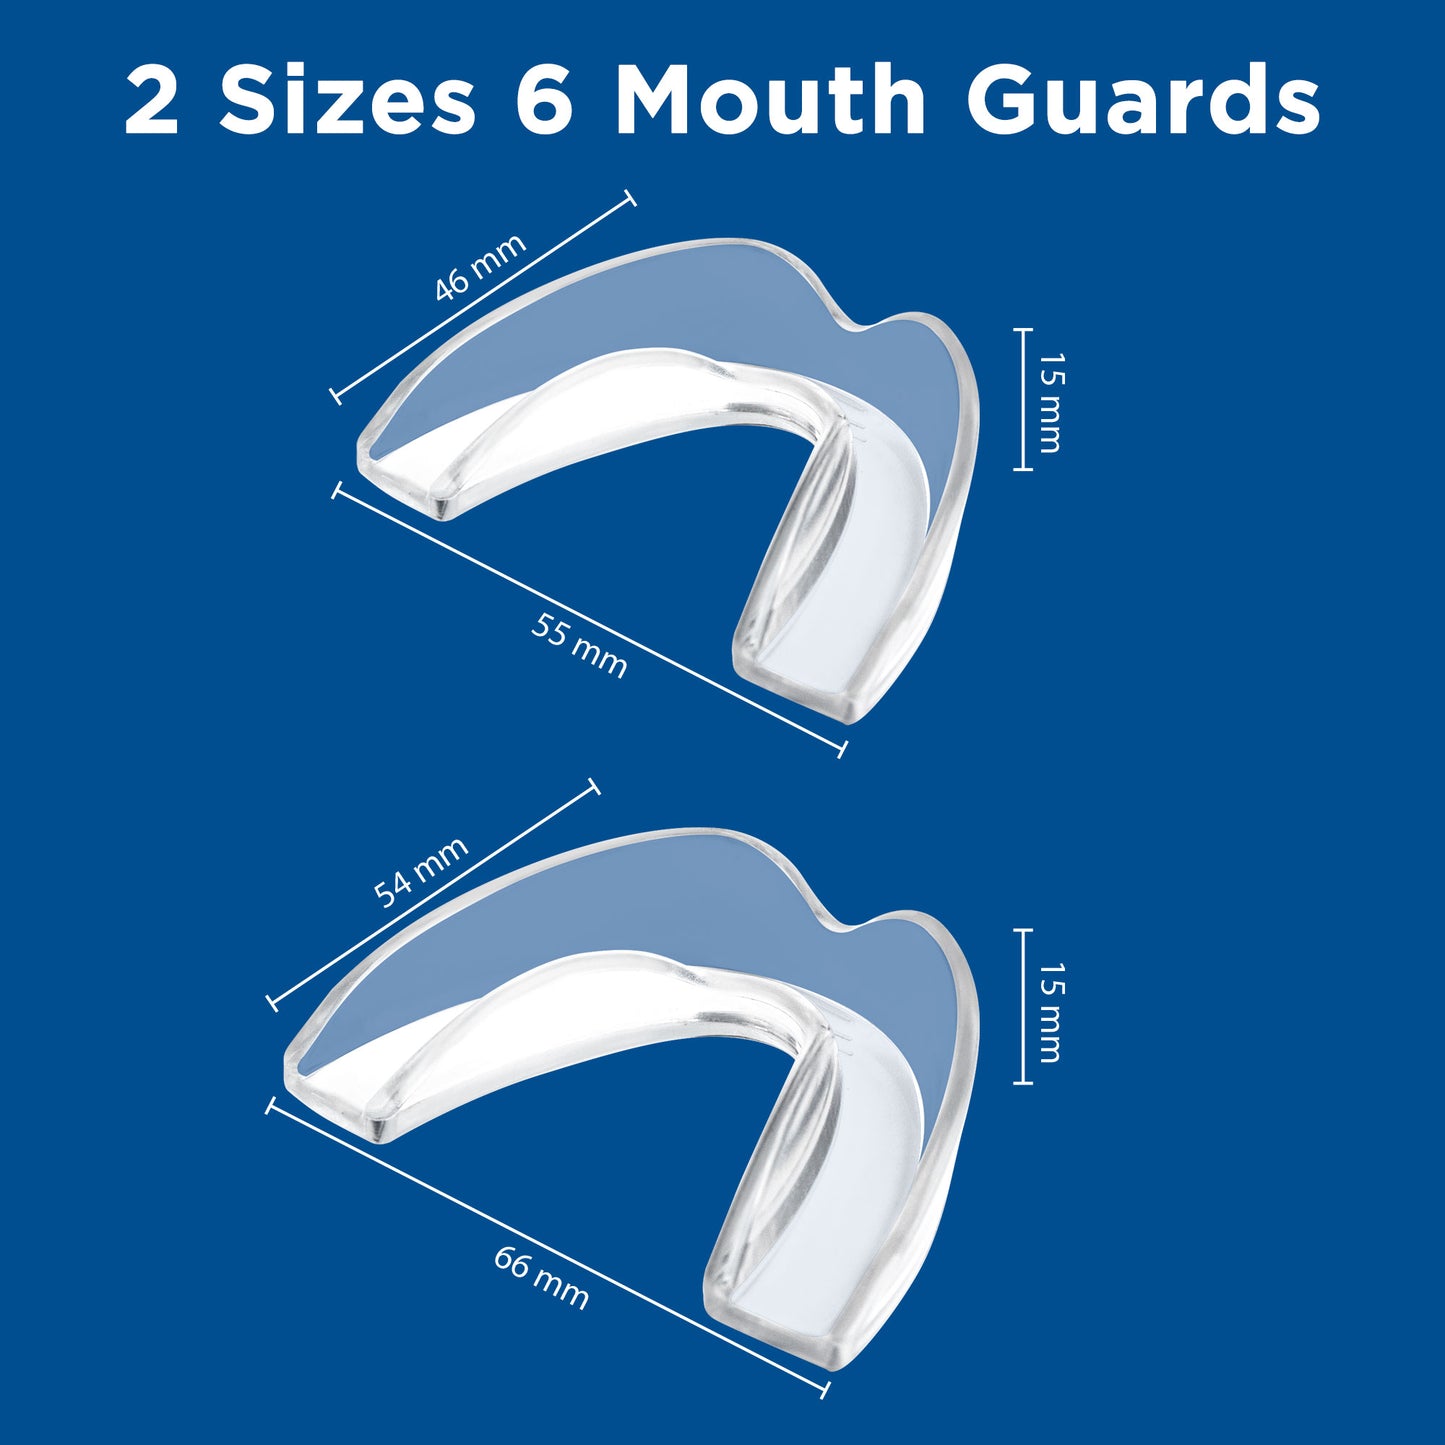 Charmpoo Mouth Guard for Grinding Teeth-Mouth Guard for Clenching Teeth at Night-Pack of 6 with 2 Sizes-Night Guard Stops Bruxism, Tmj & Eliminates Teeth Clenching